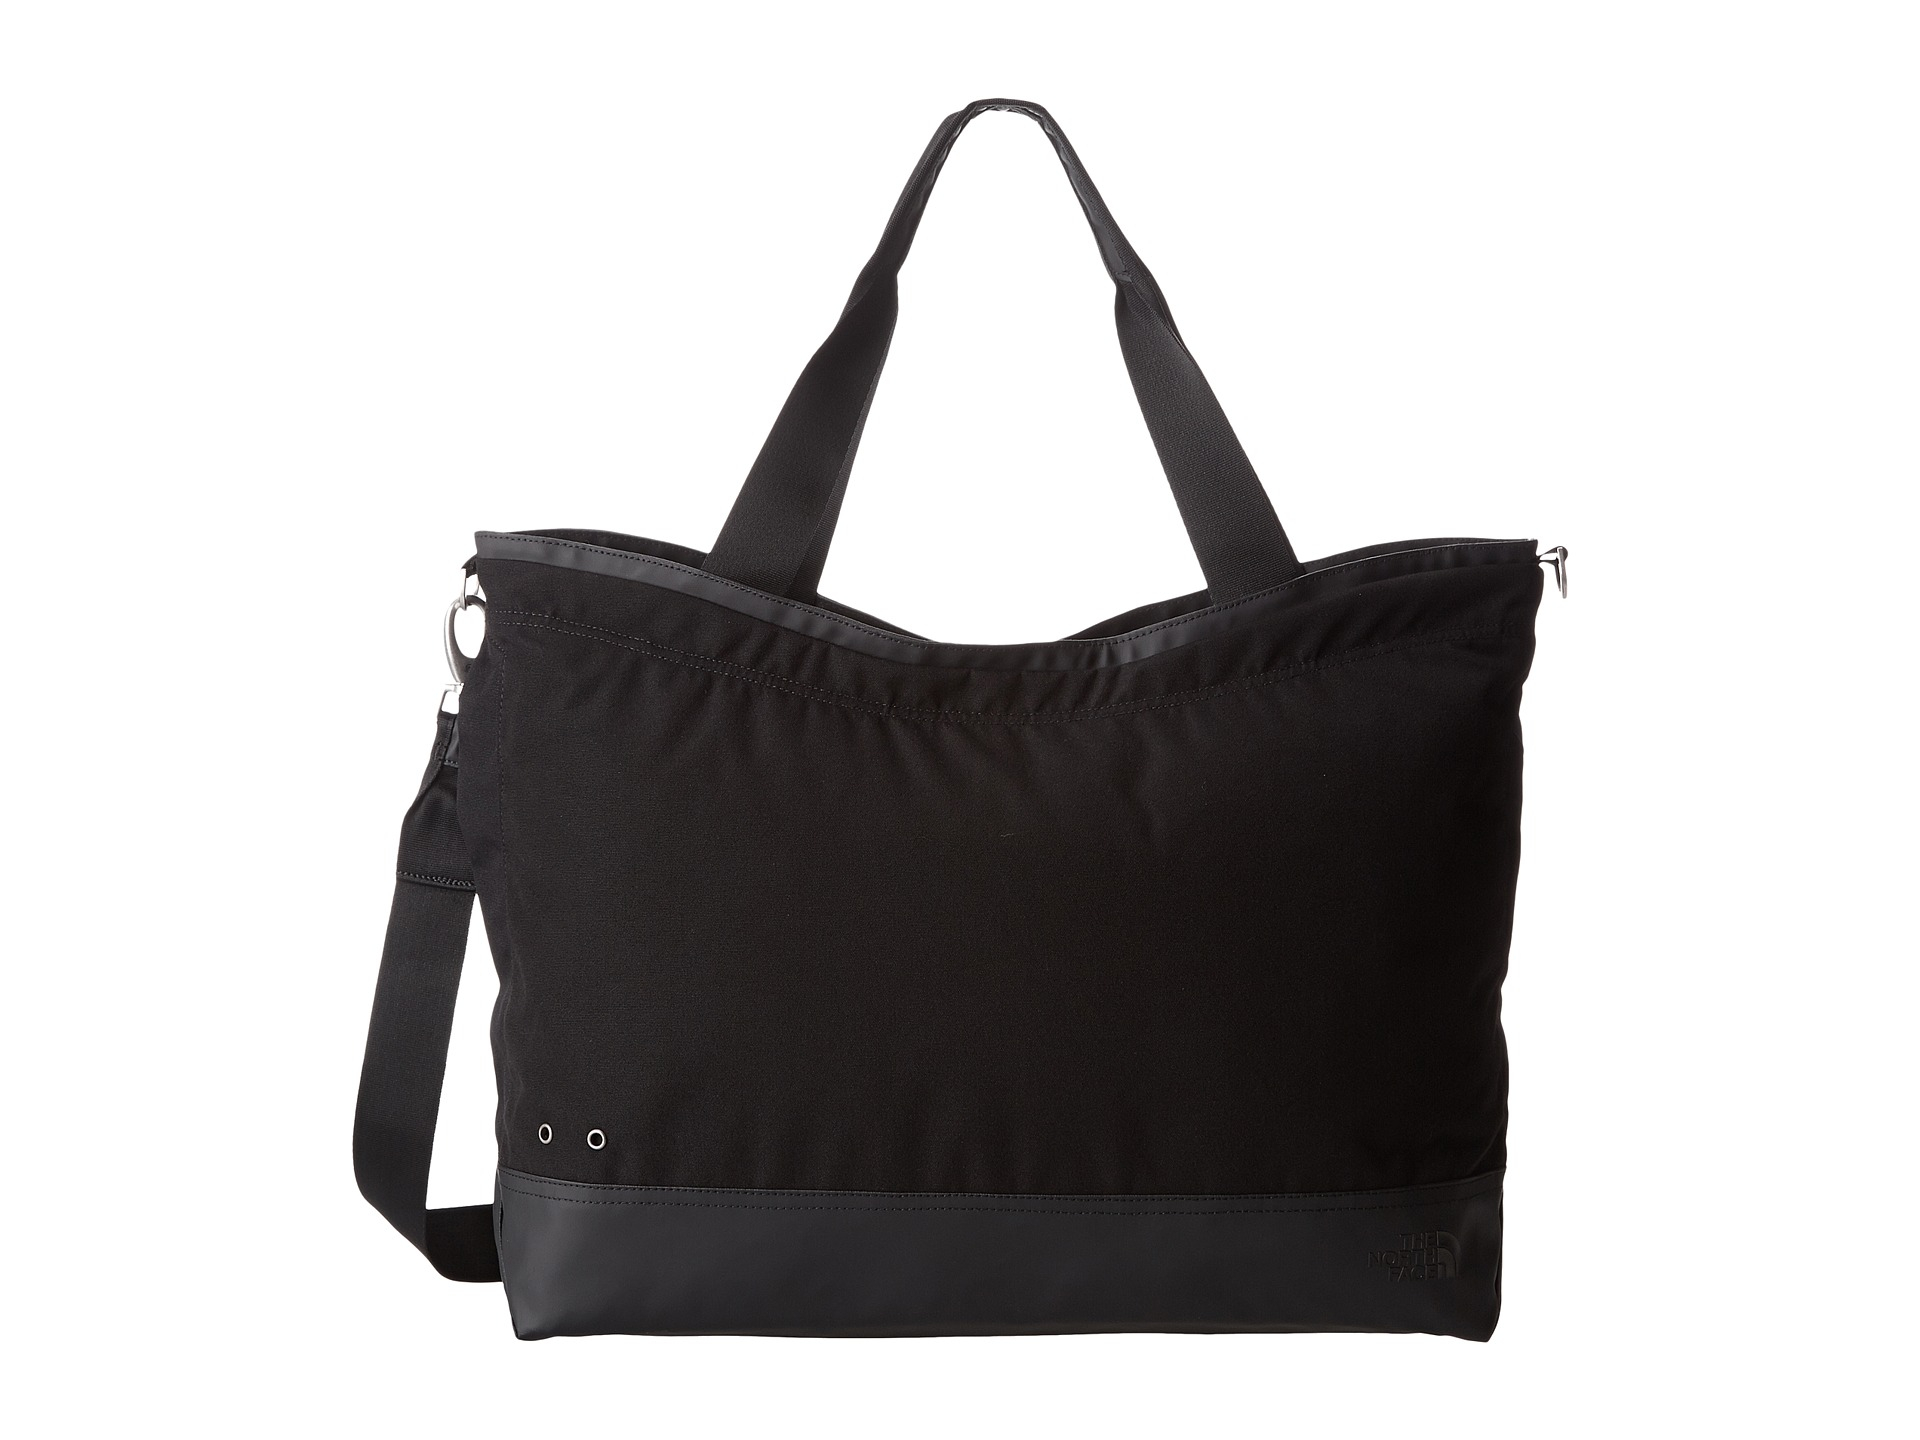 Lyst - The North Face Laryssa Gym Tote in Black